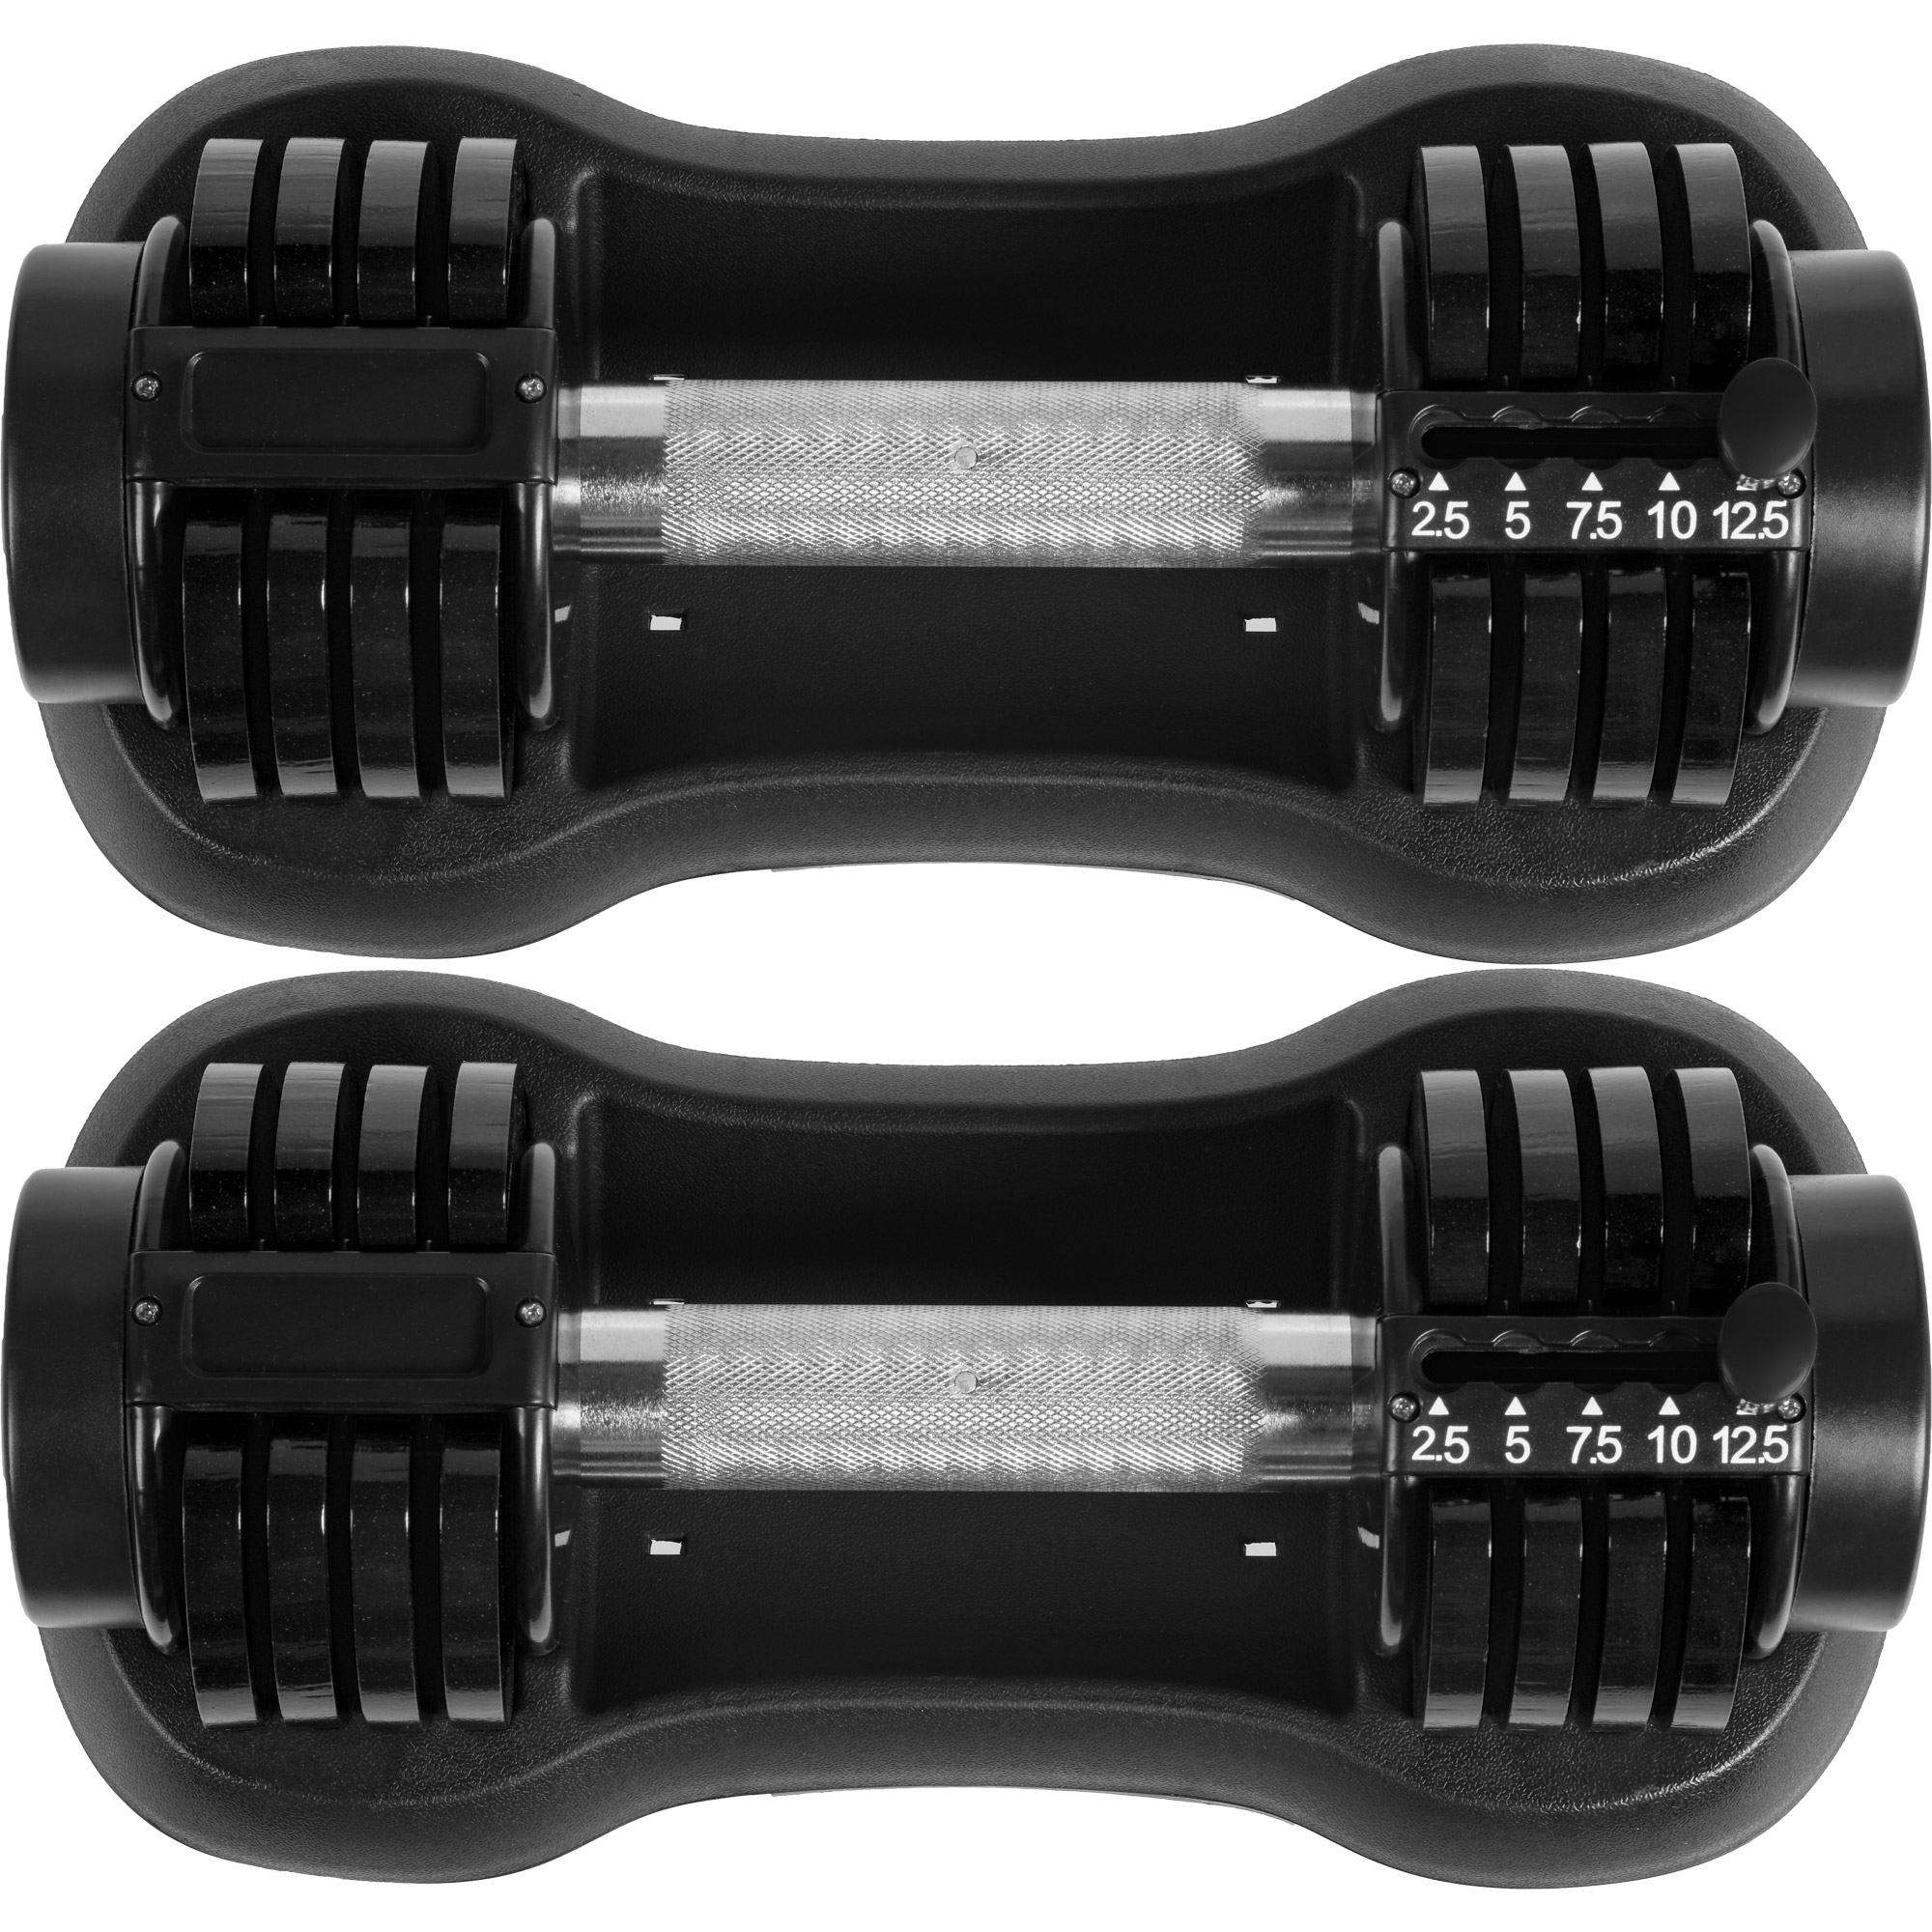 Pair of 12.5 Lbs Adjustable Dumbbell with Handle and Weight Plate for Home Gym black-Boyel Living